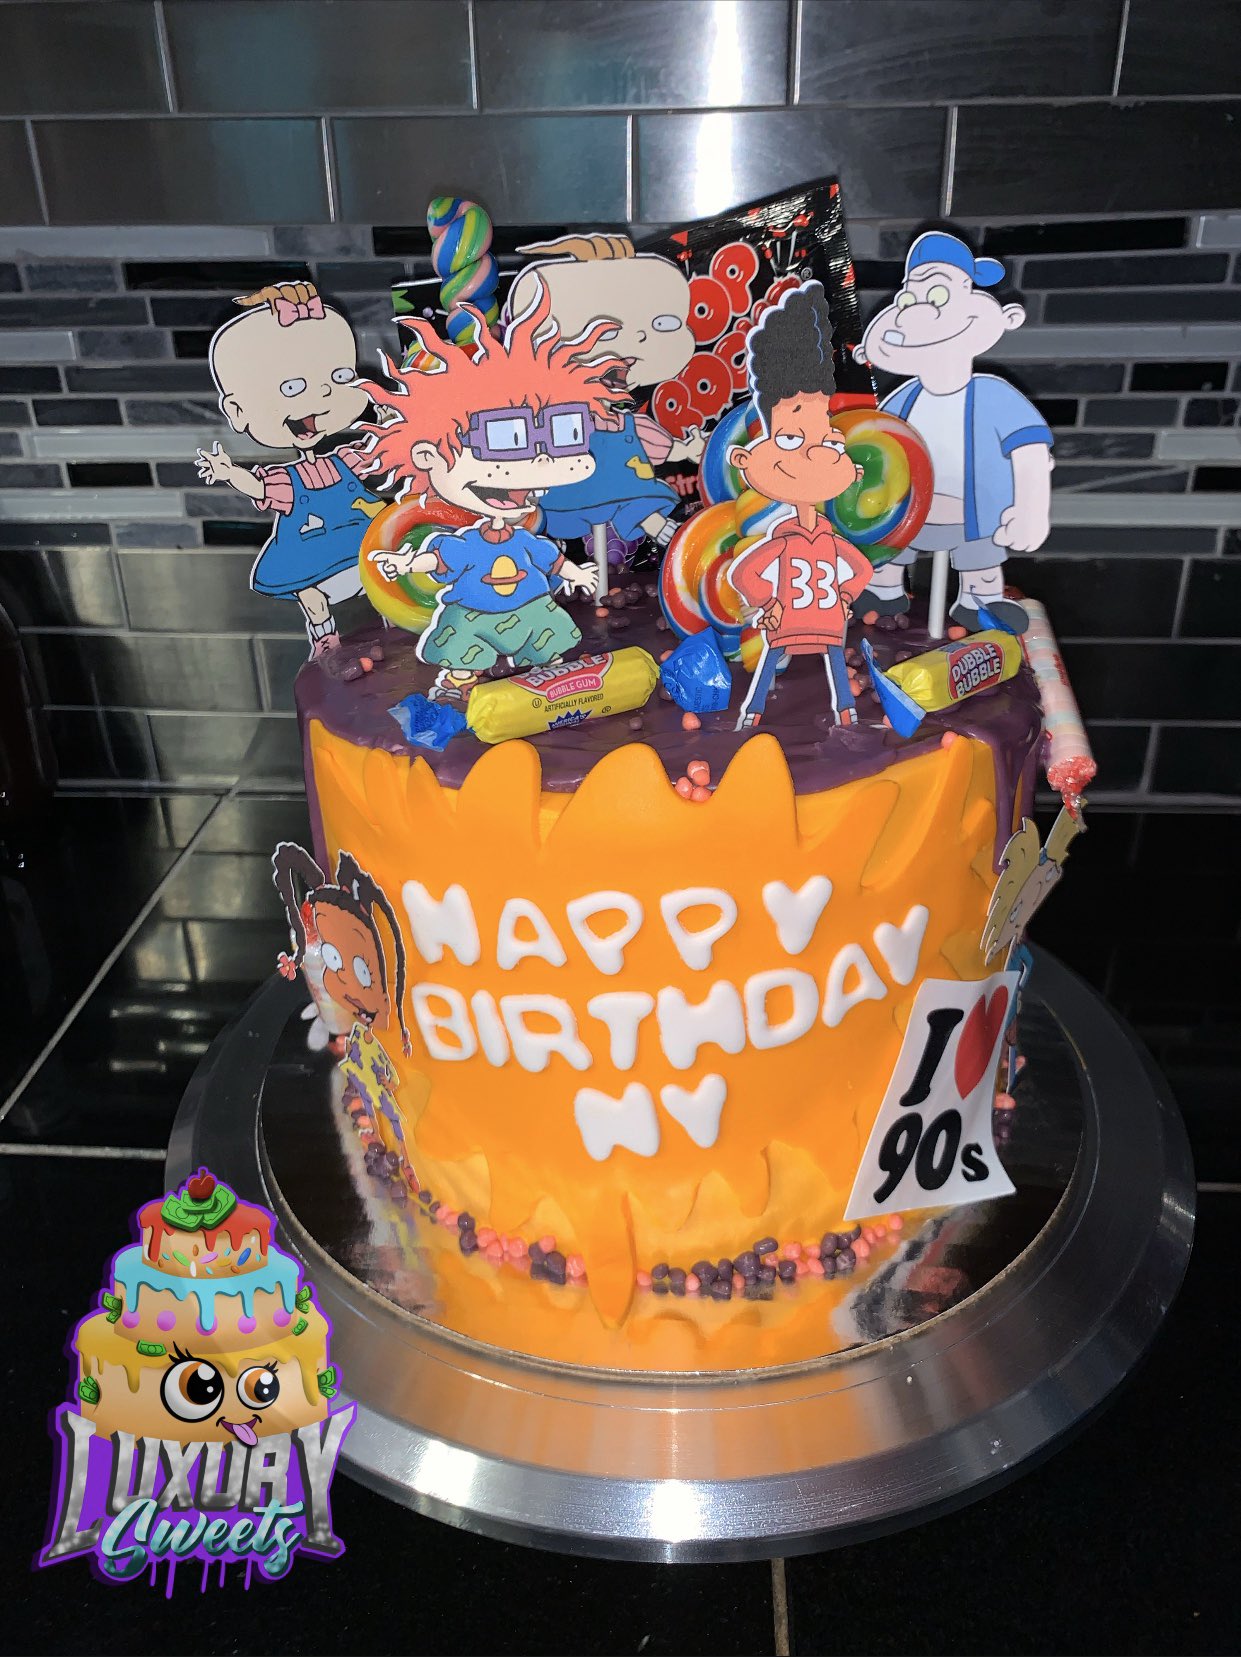 A Nickelodeon themed cake from the 1990s